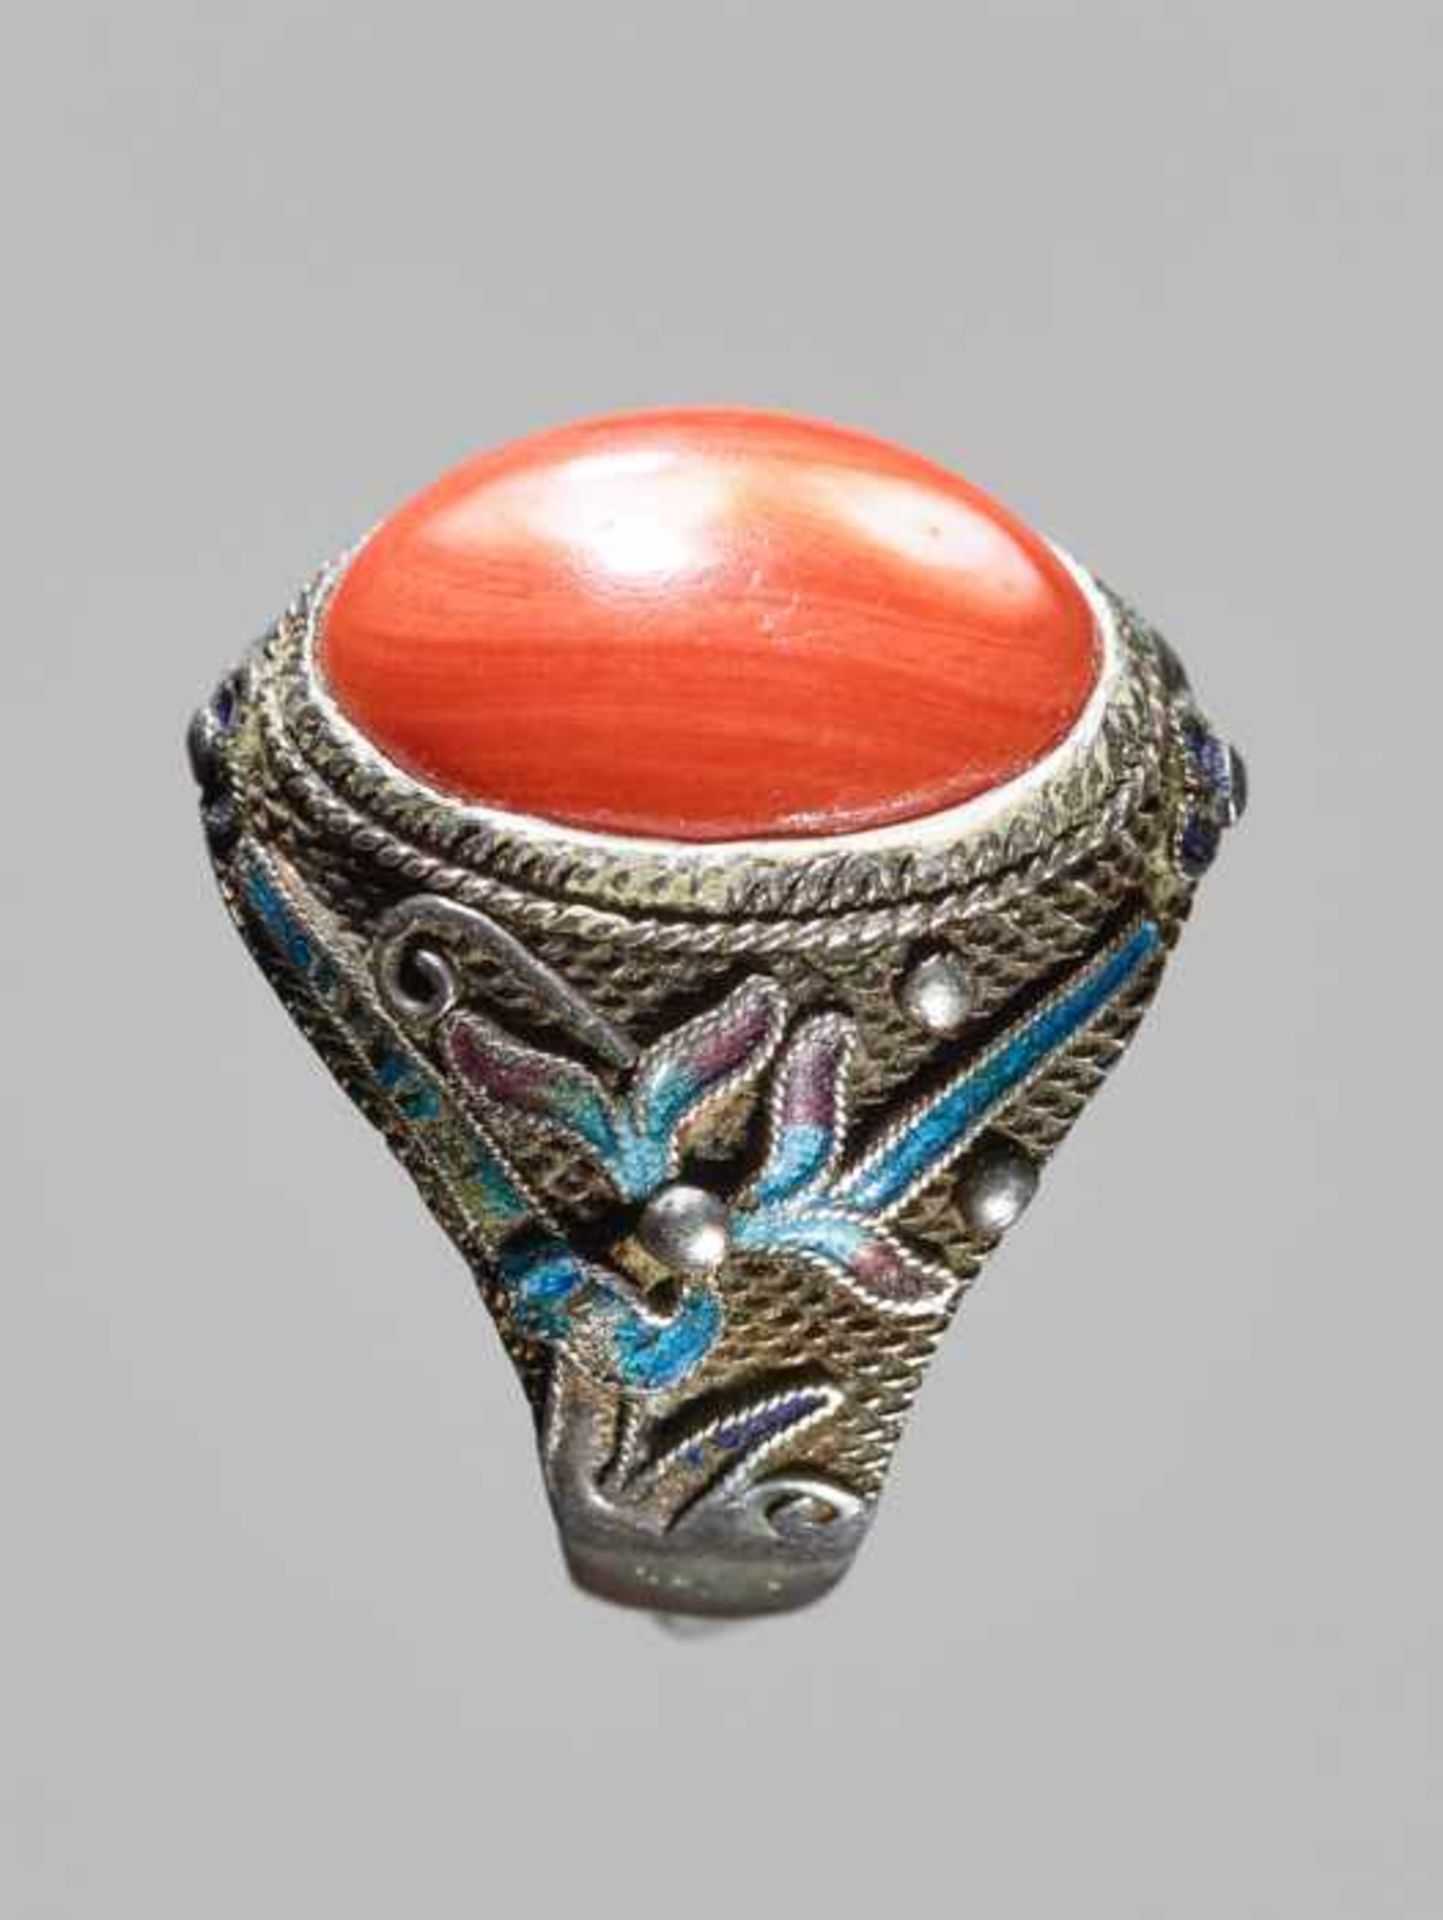 AN ENAMELED EXPORT SILVER RING WITH A LARGE CORAL CABOCHON, QING DYNASTY Silver and coral, the